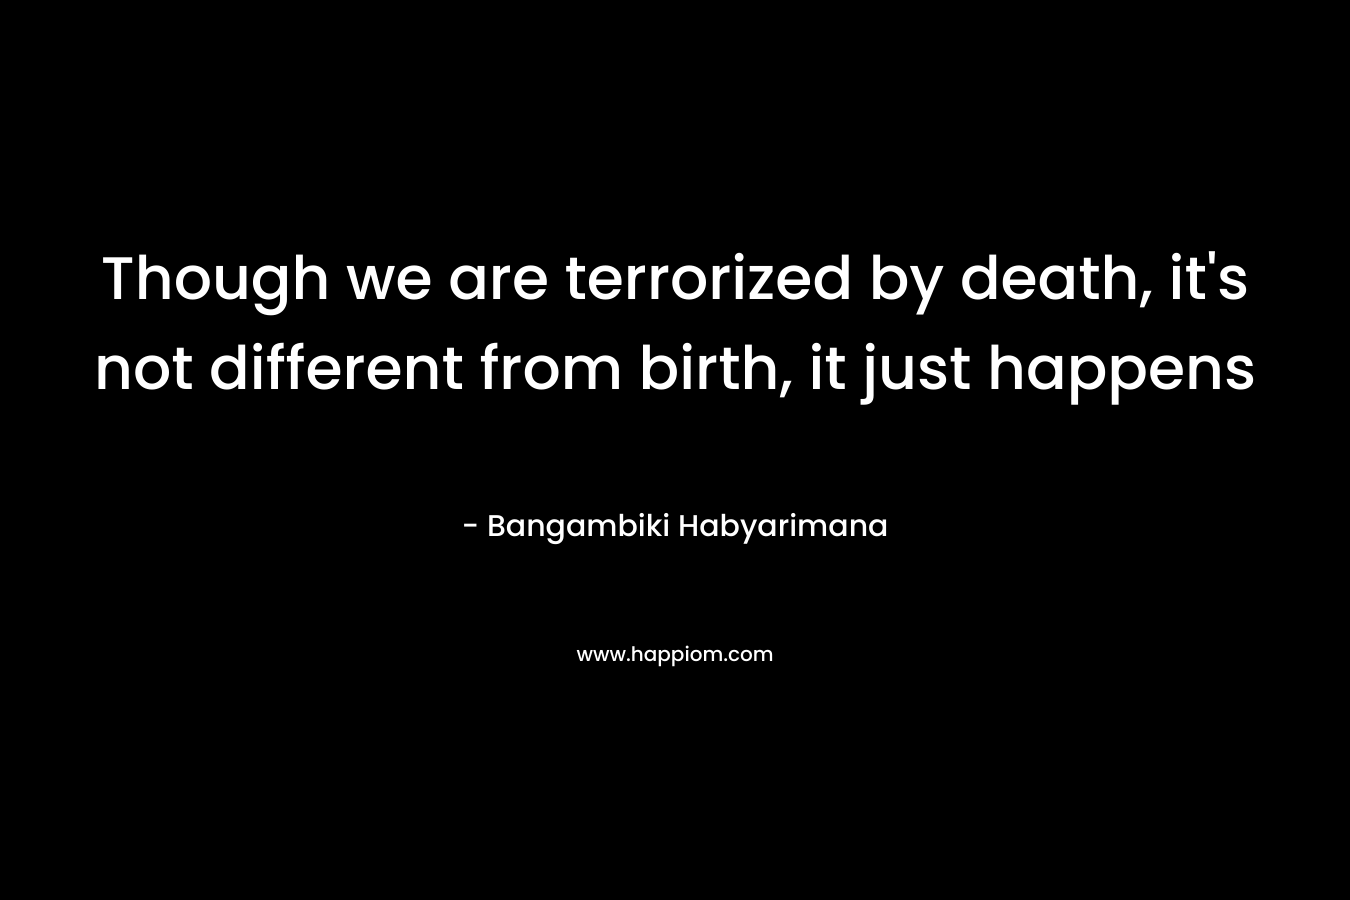 Though we are terrorized by death, it’s not different from birth, it just happens – Bangambiki Habyarimana